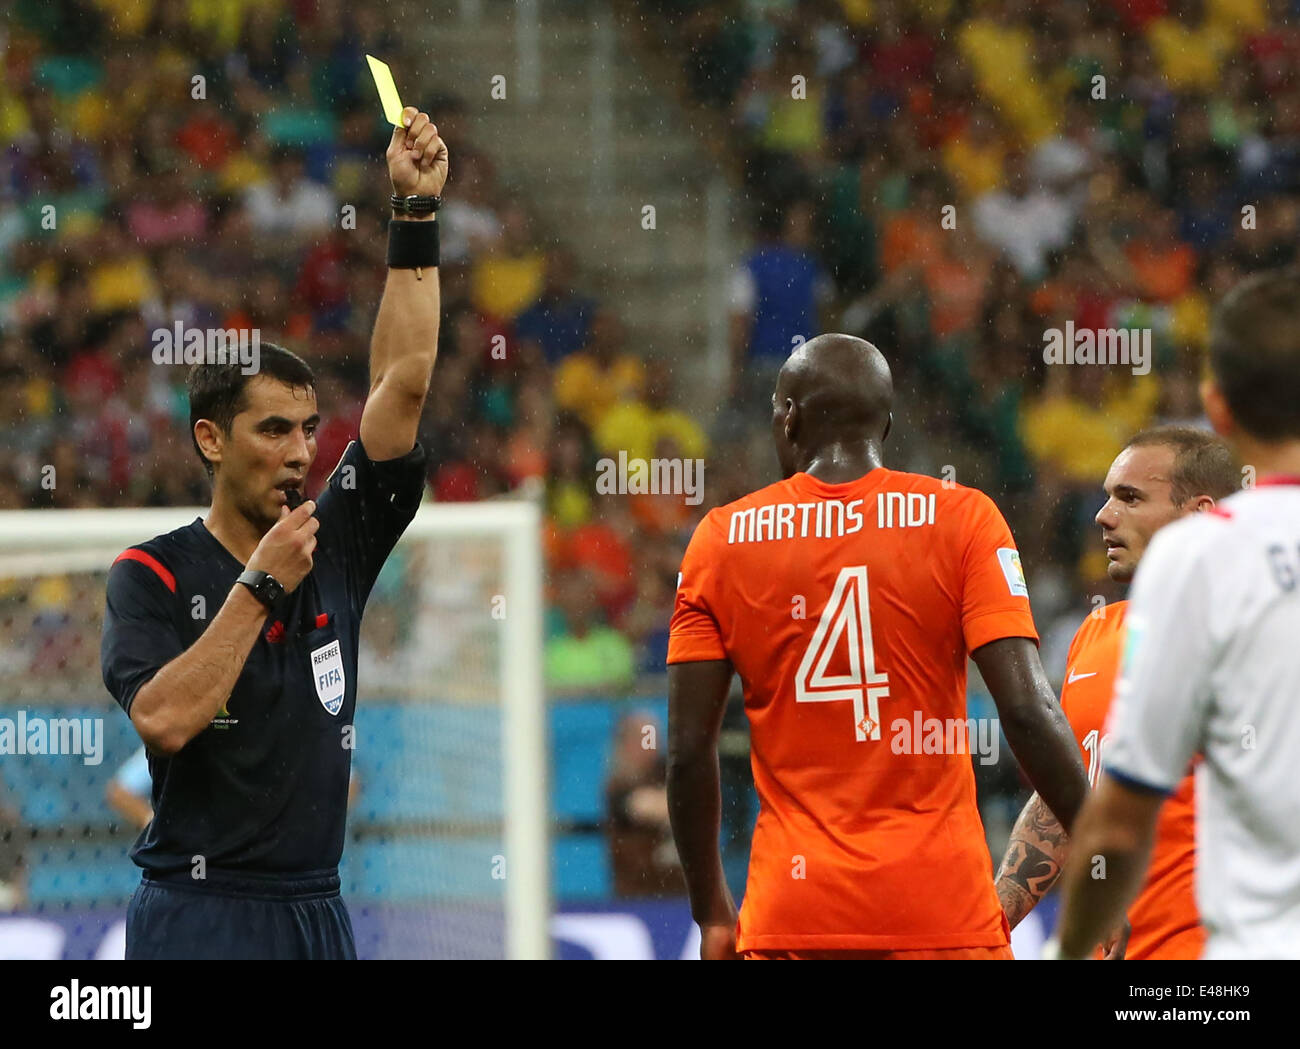 Salvador, Brazil. 5th July, 2014. Uzbekistan's referee Ravshan Irmatov (1st L) shows a yellow card to Netherlands' Bruno Martins Indi (2nd L) during a quarter-finals match between Netherlands and Costa Rica of 2014 FIFA World Cup at the Arena Fonte Nova Stadium in Salvador, Brazil, on July 5, 2014. Credit:  Cao Can/Xinhua/Alamy Live News Stock Photo